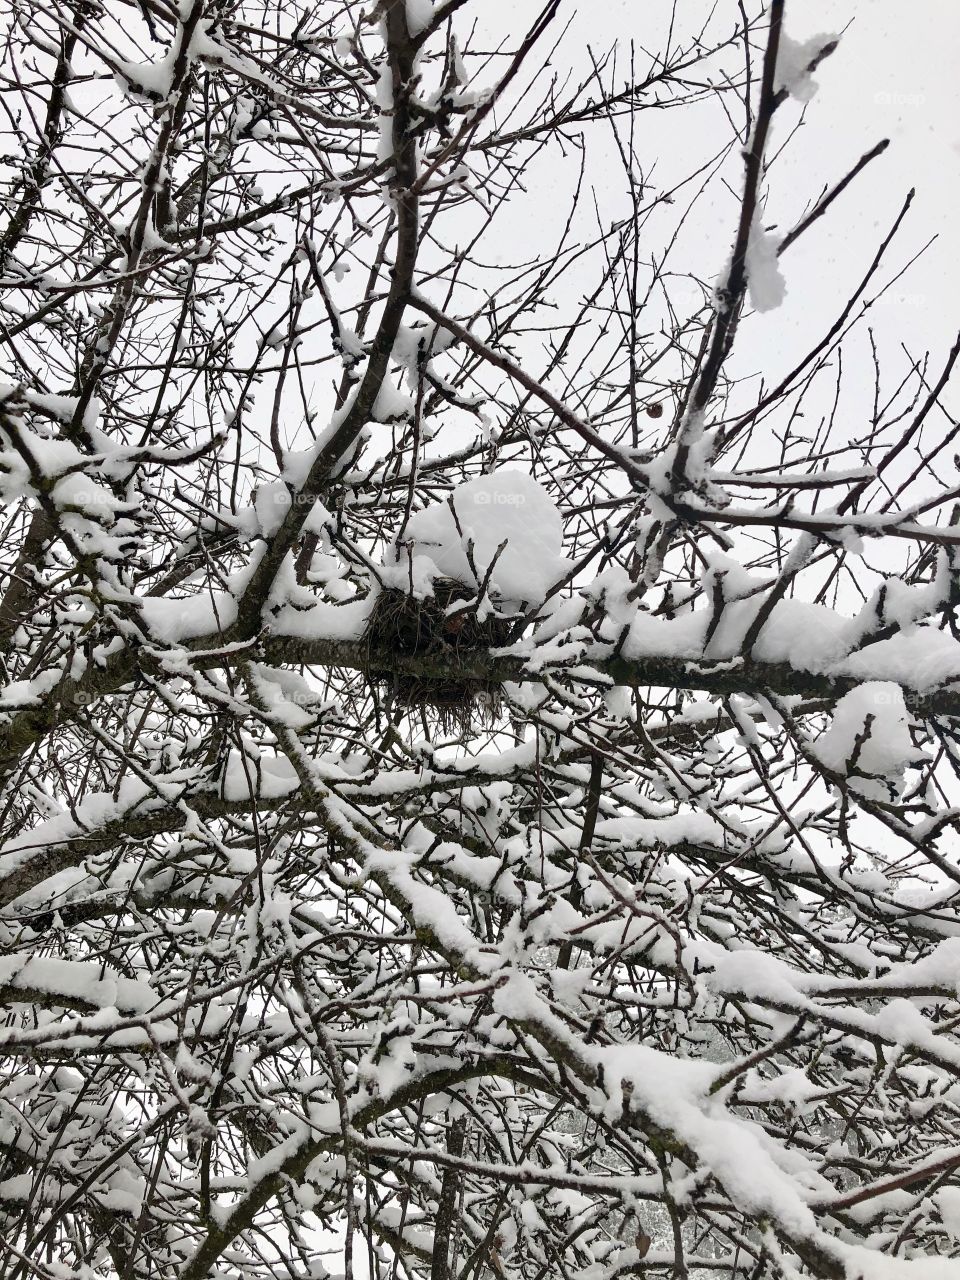 Bird’s nest filled with snow